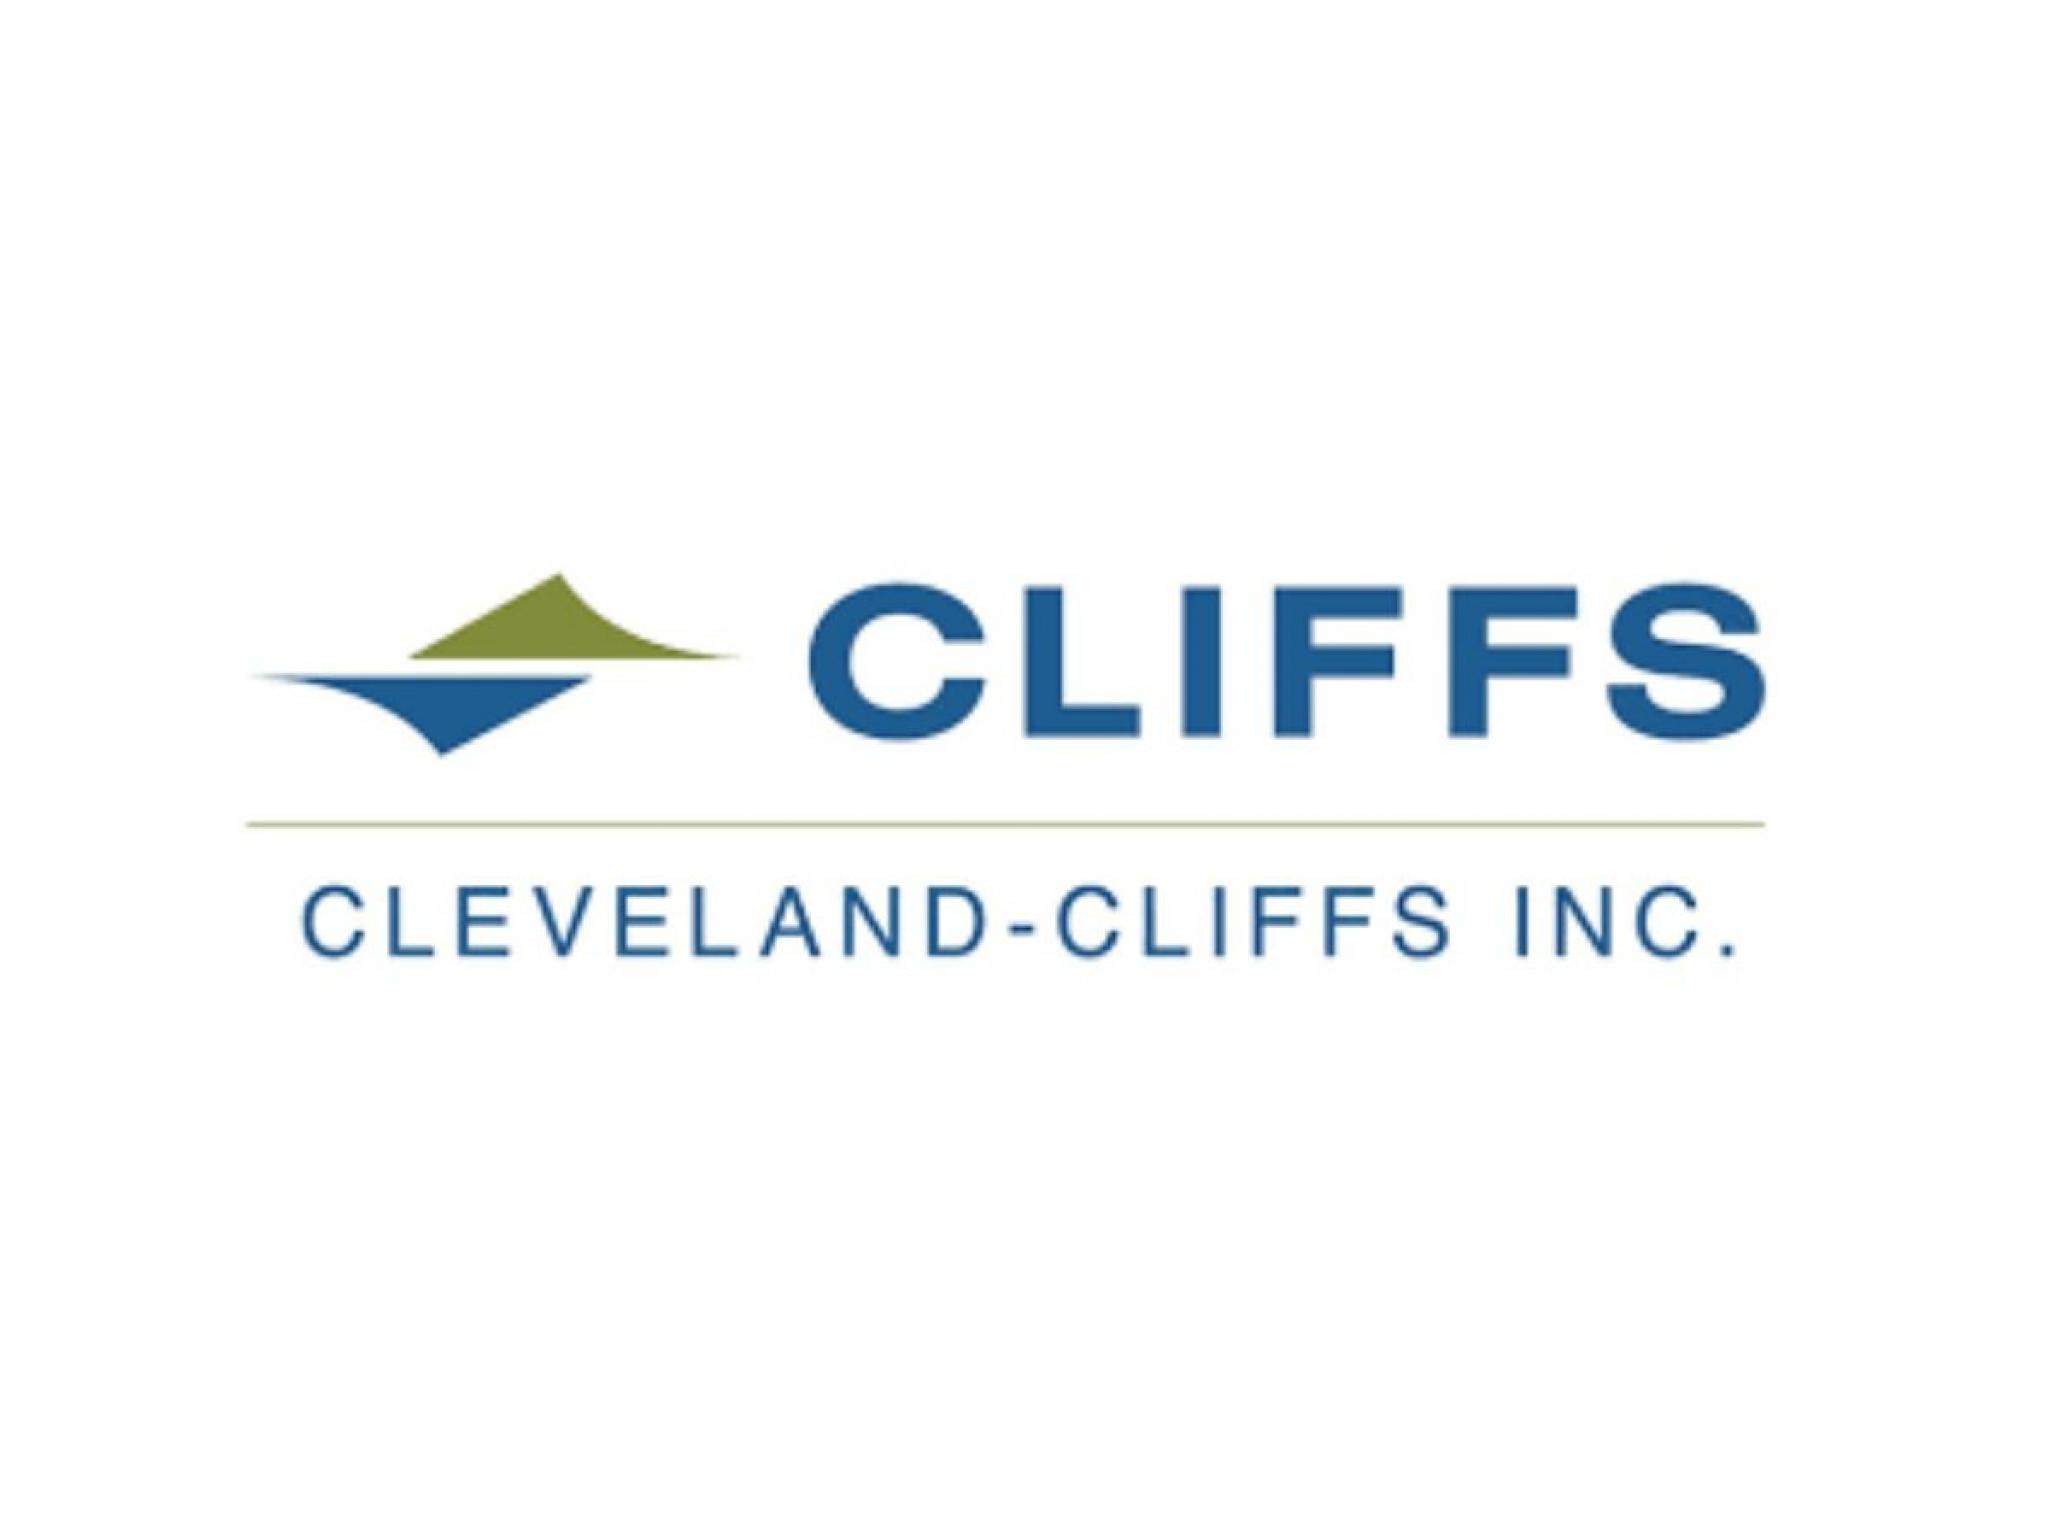  cleveland-cliffs-sprouts-farmers-market-and-2-other-stocks-insiders-are-selling 